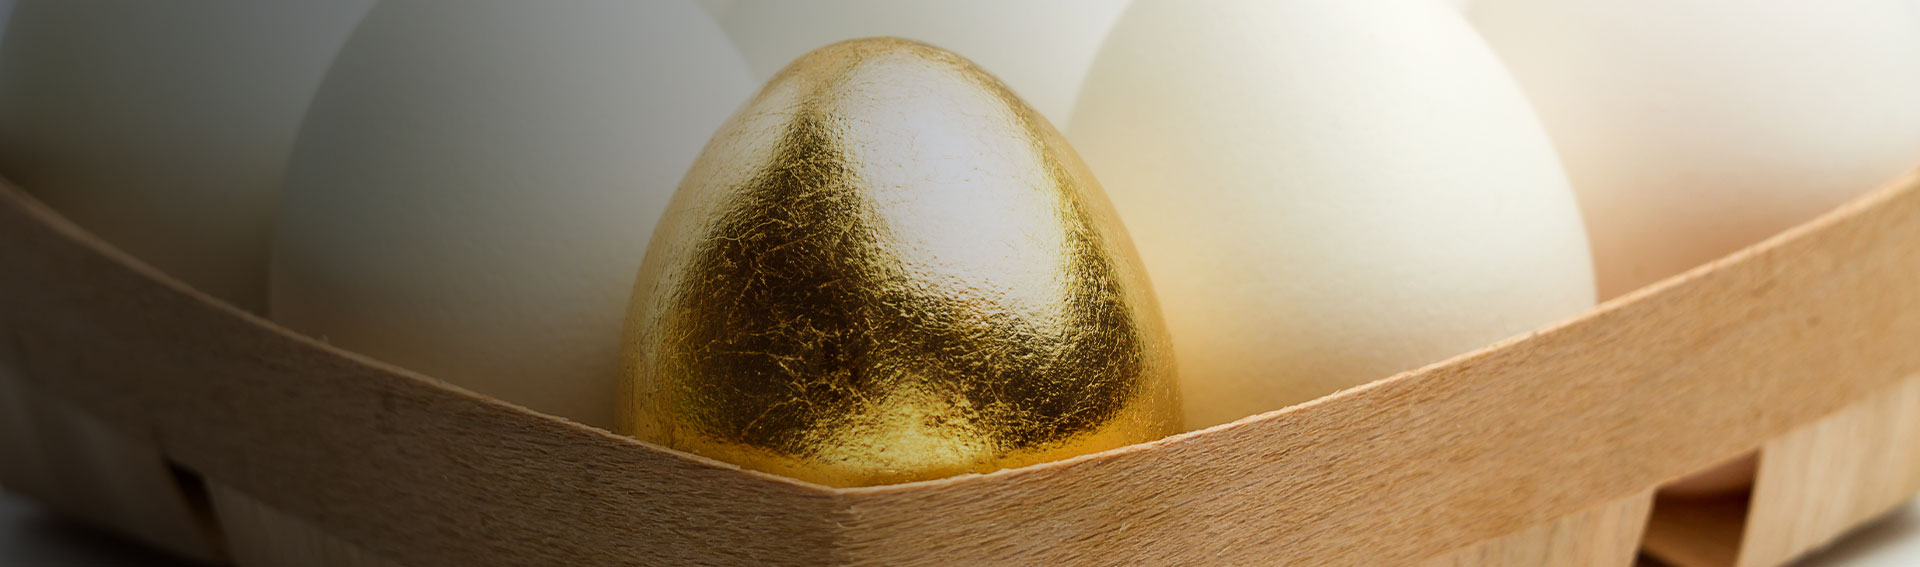 post image Making Room for a Few Golden Eggs